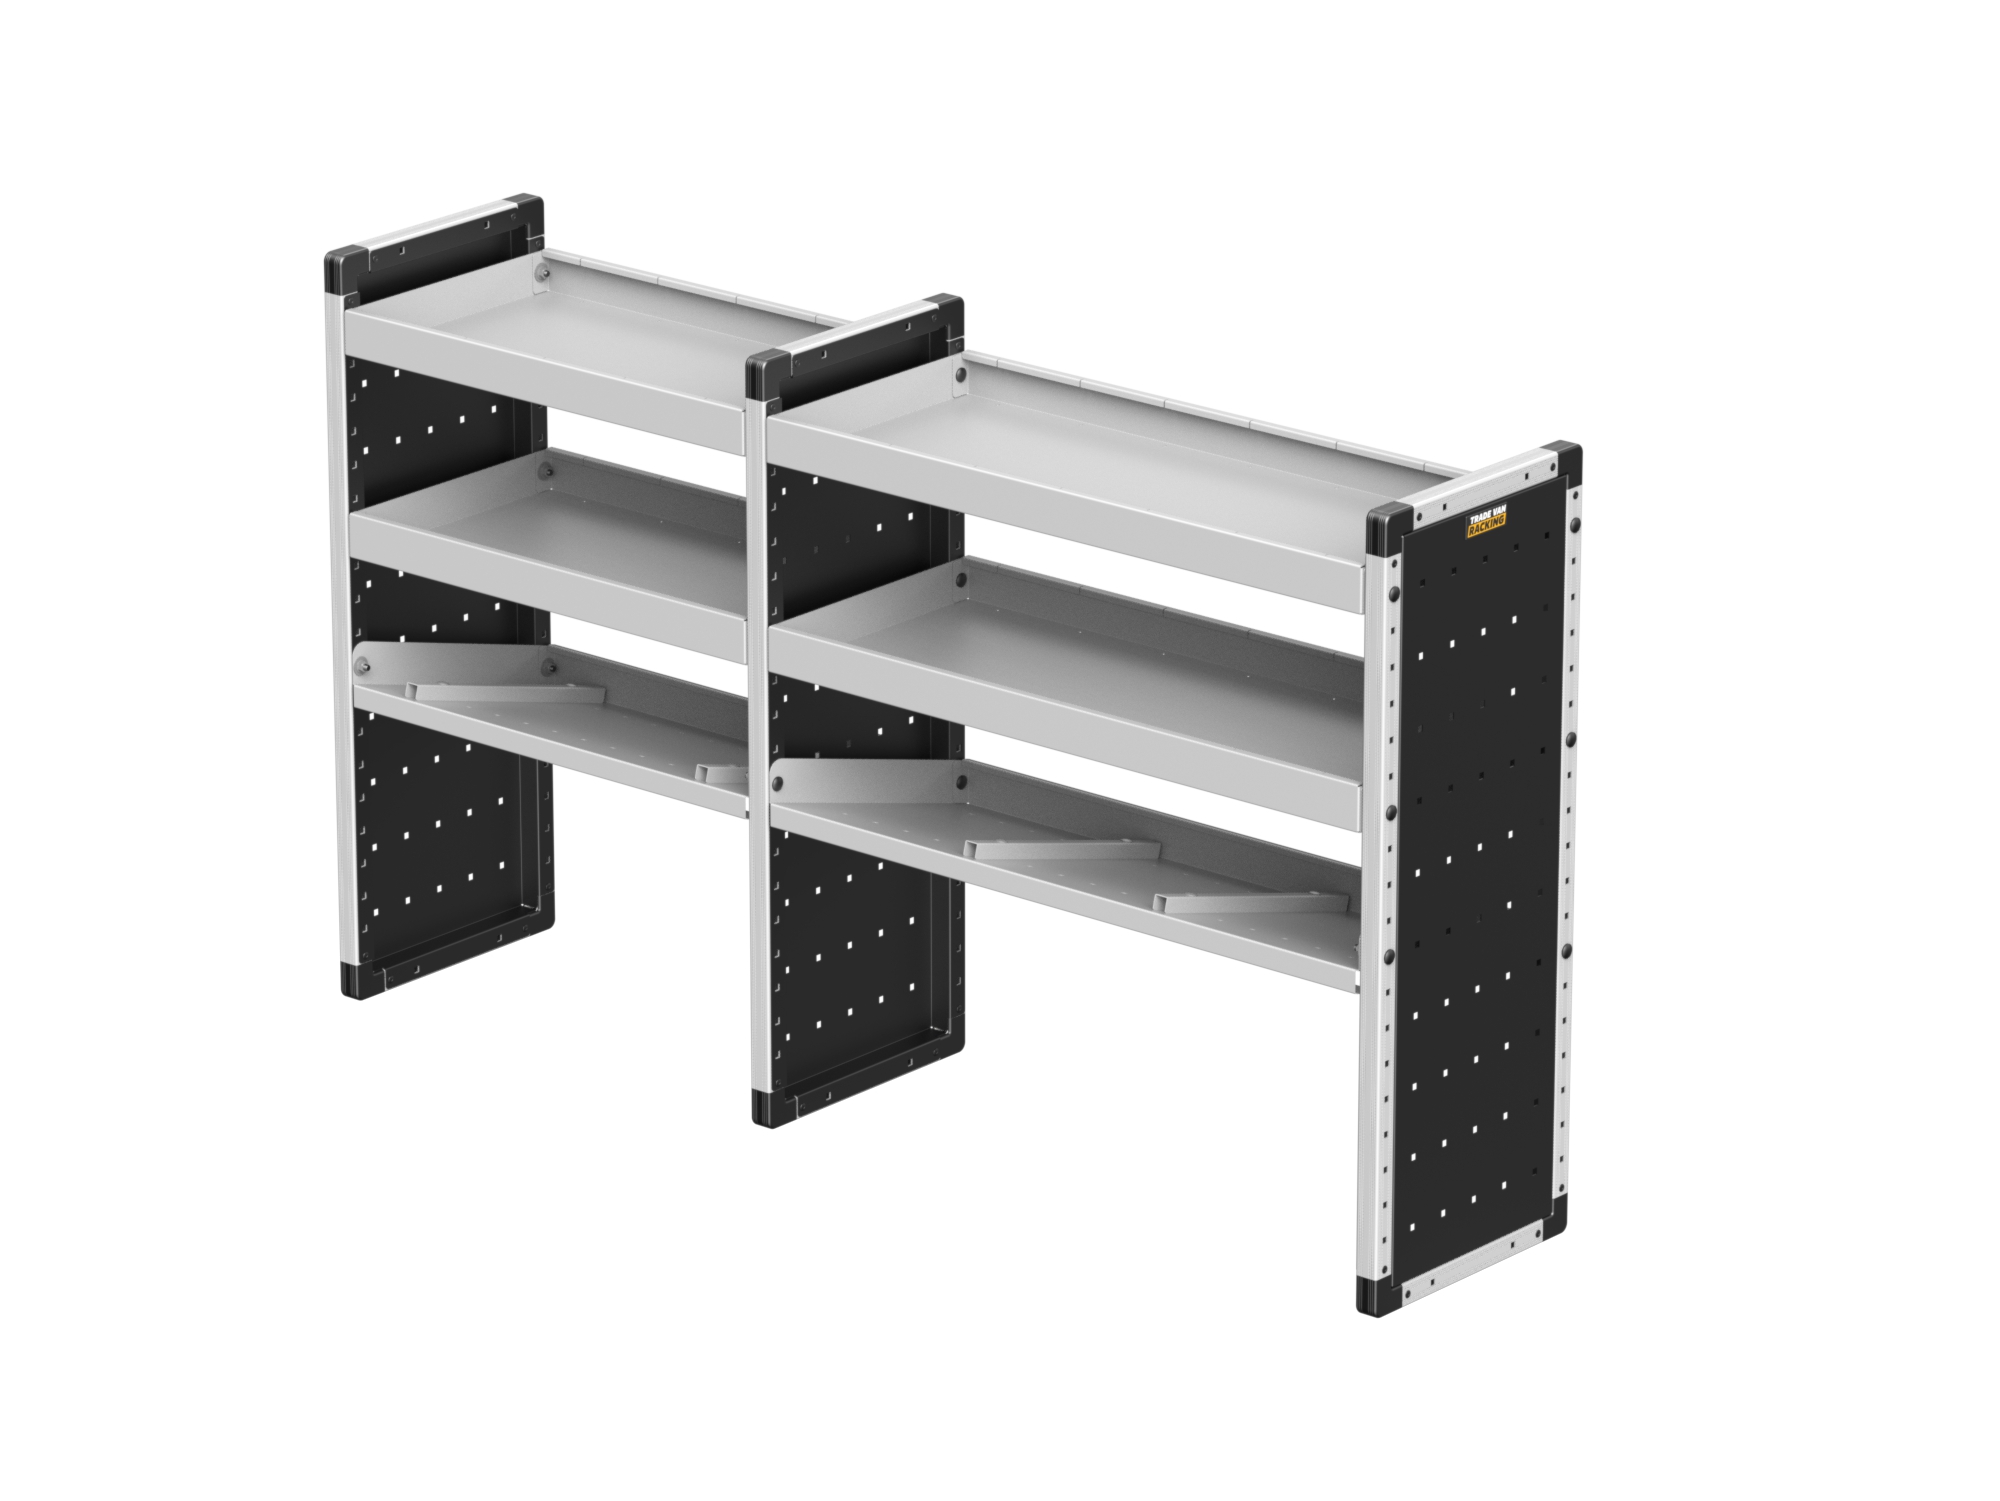 Trade Van Racking - Double Unit - 2 straight & 1 angled per bay - TVR-DBL-002